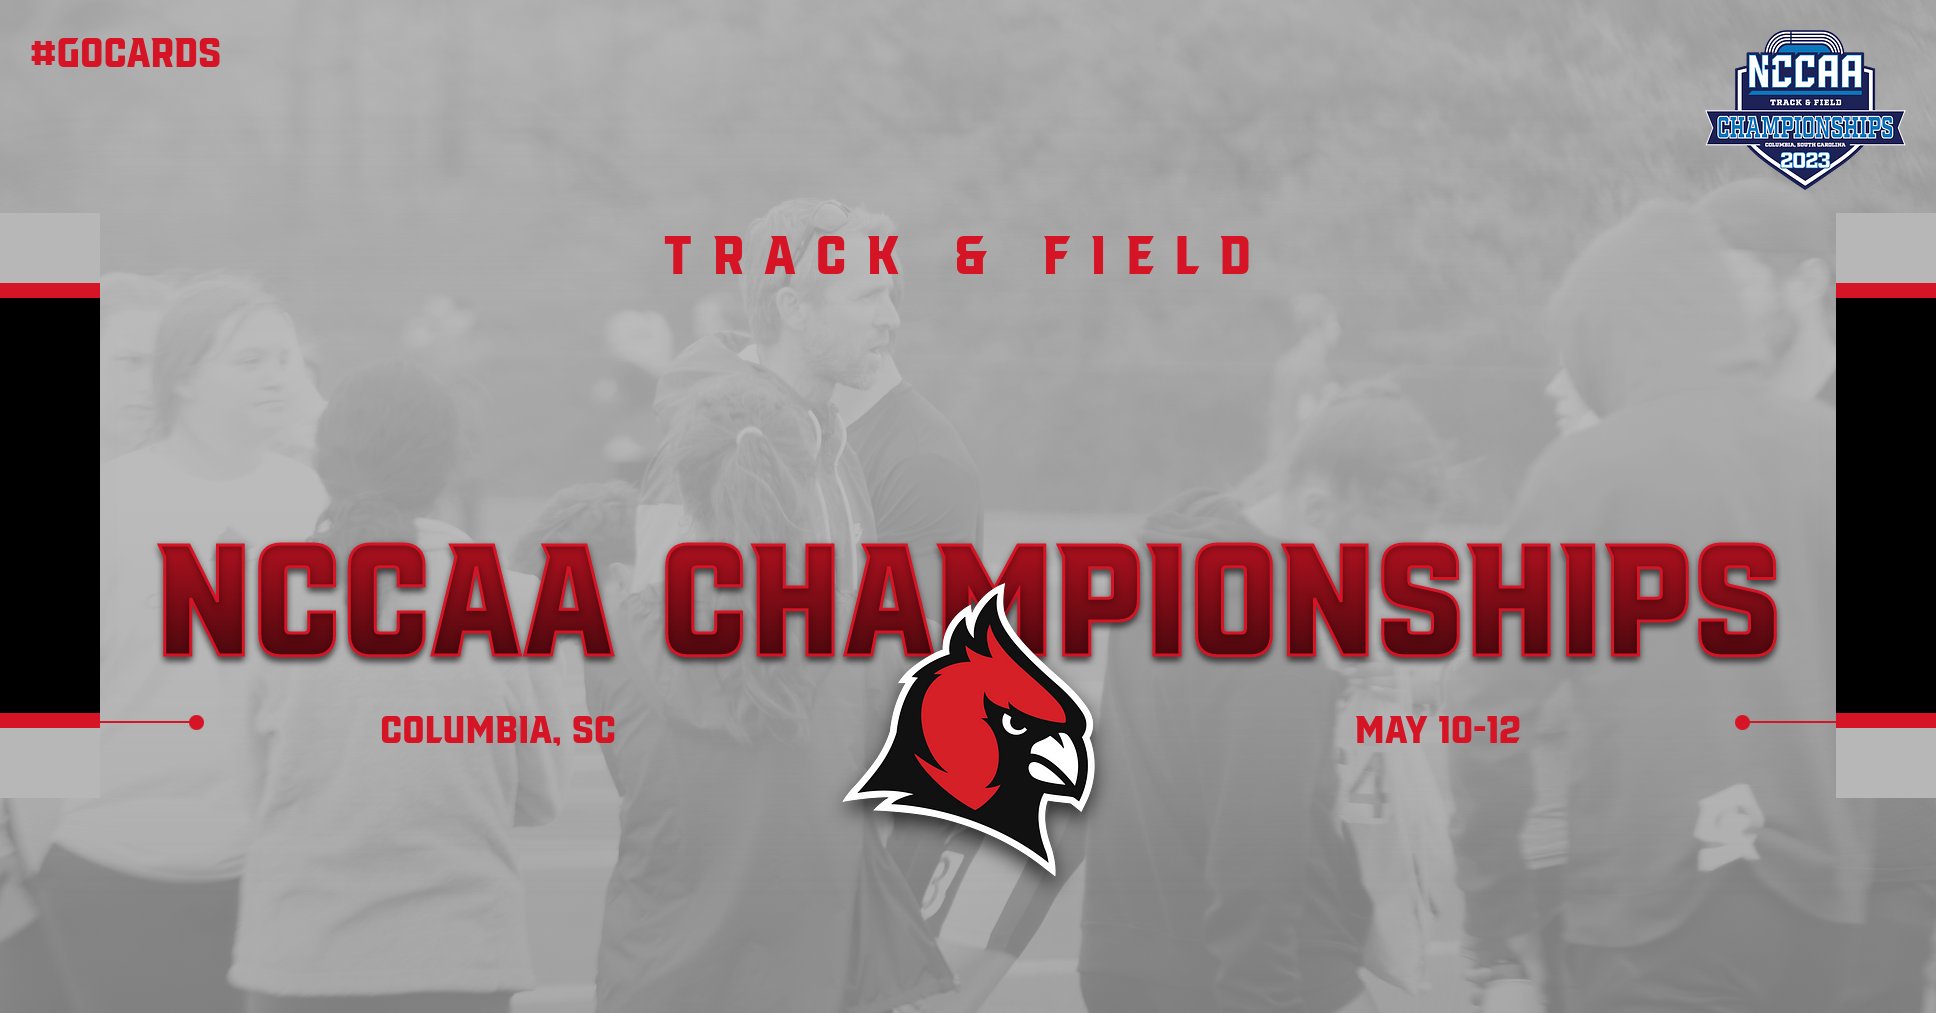 NCCAA PREVIEW: Men's Track & Field competing at the NCCAA Championships this week